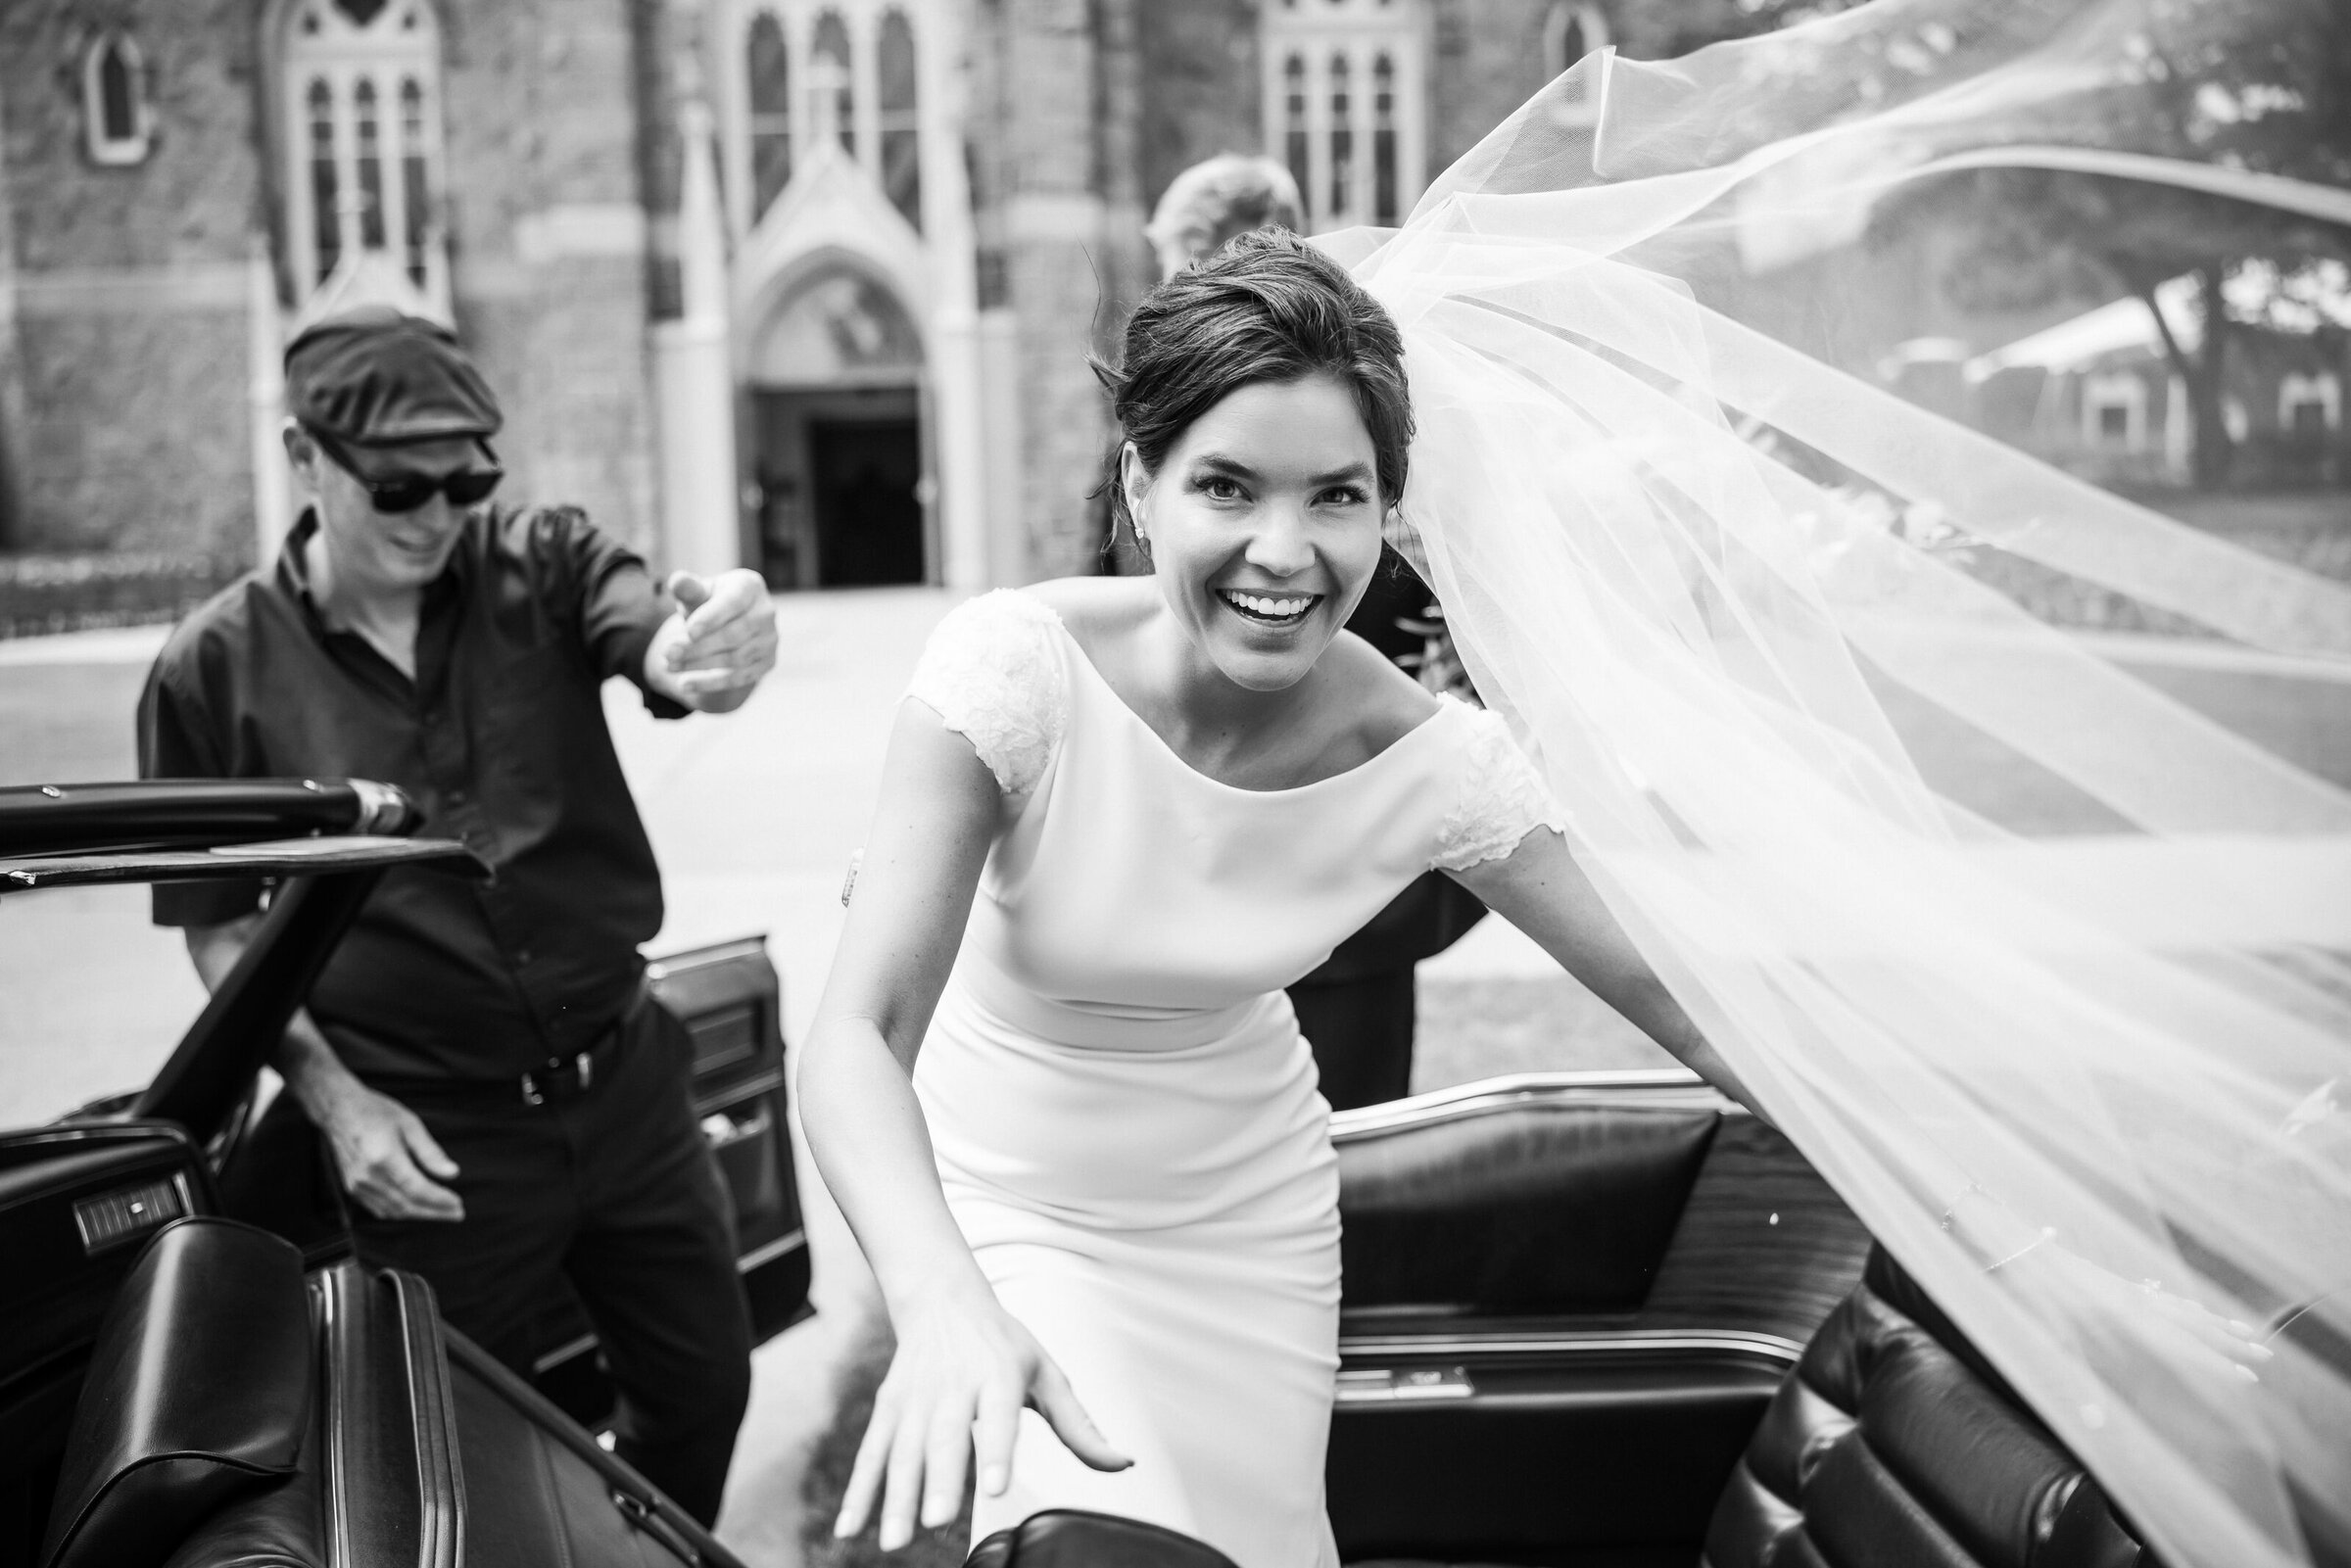 Stunning bride in a Pronovias gown is getting into the wedding car after the ceremony in Philadelphia